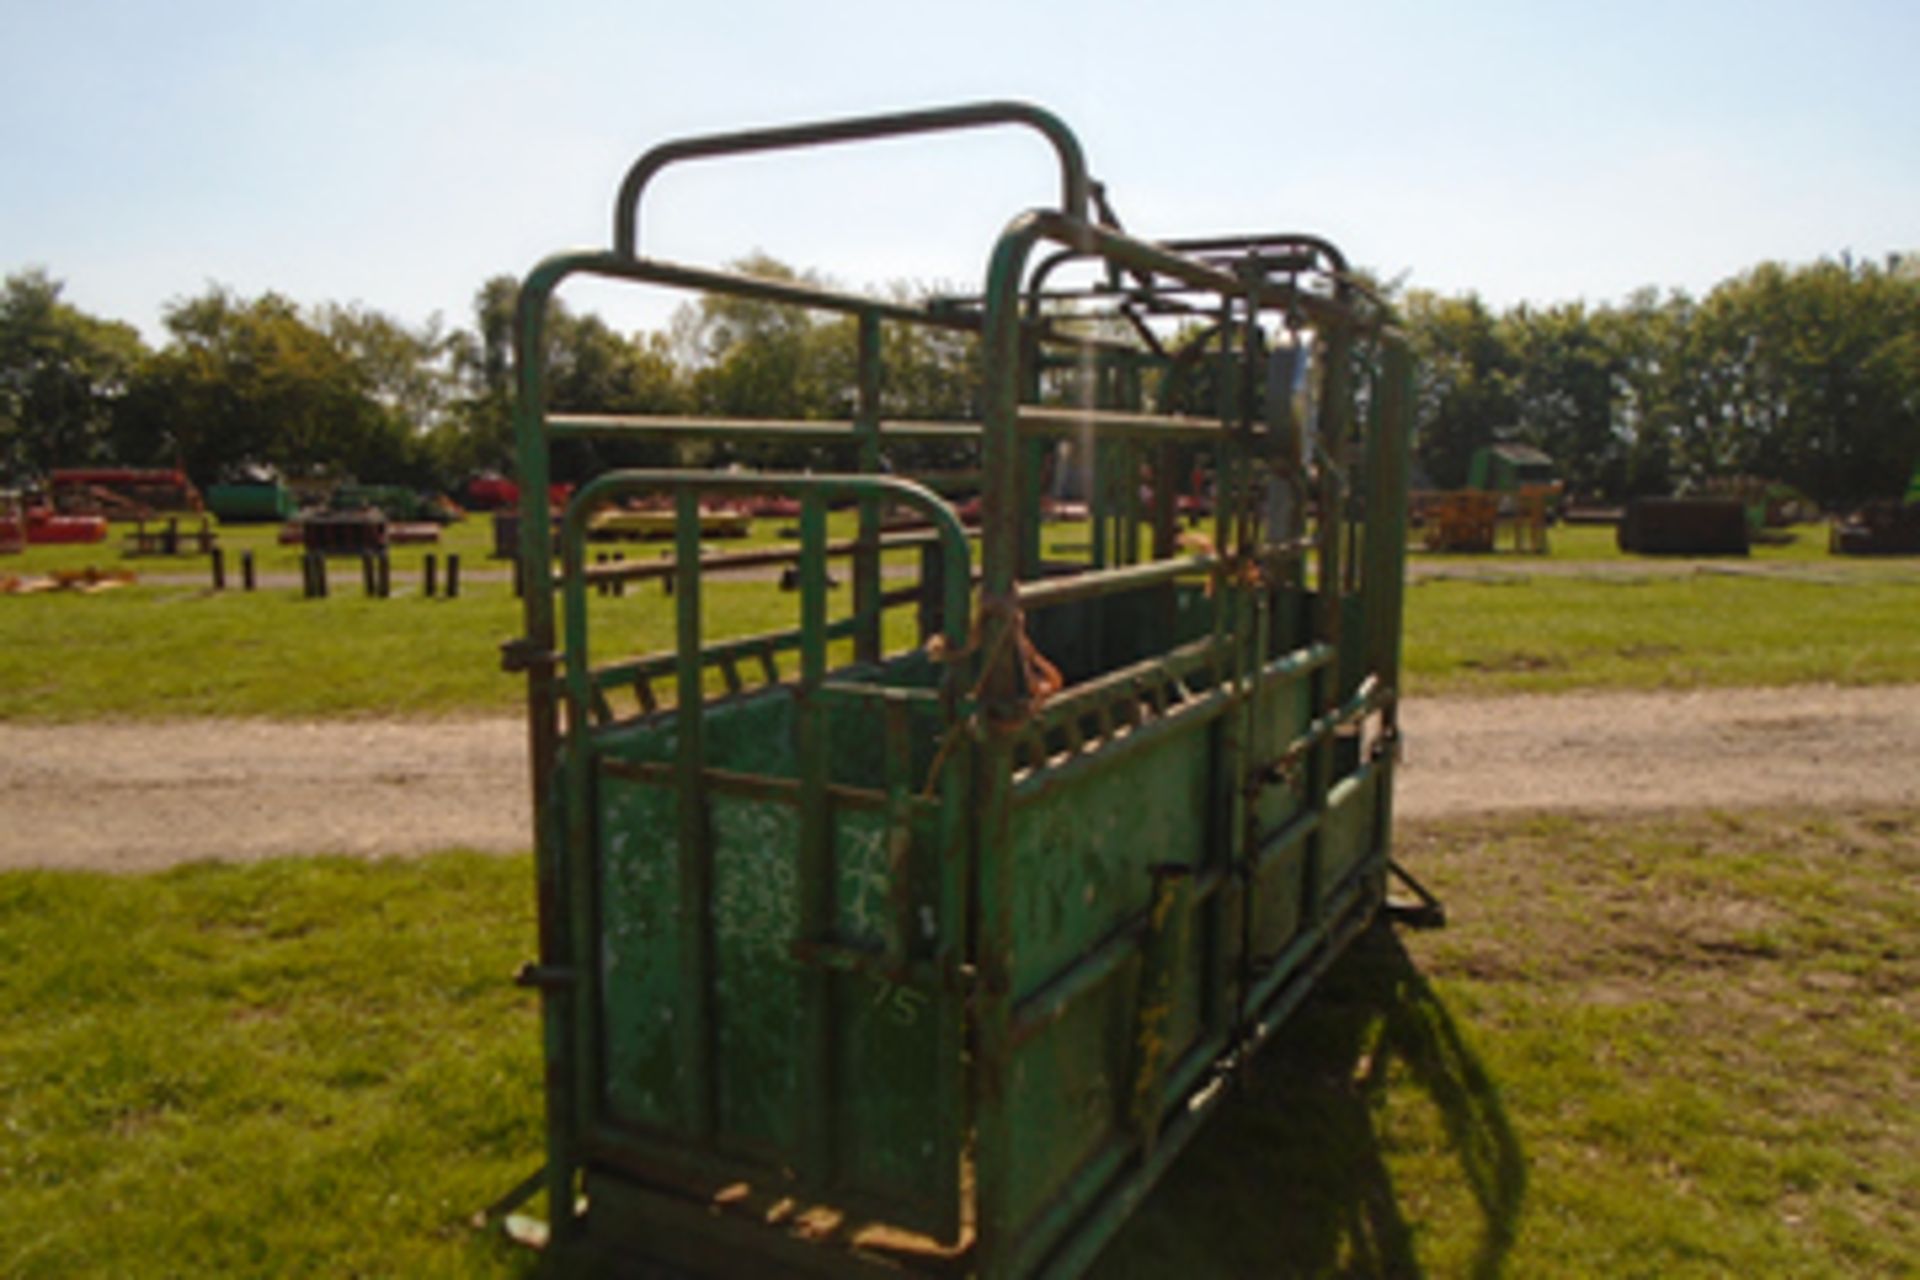 Cattle weigh crush, scales worked when used a couple of years ago. scales stored inside - Image 2 of 3